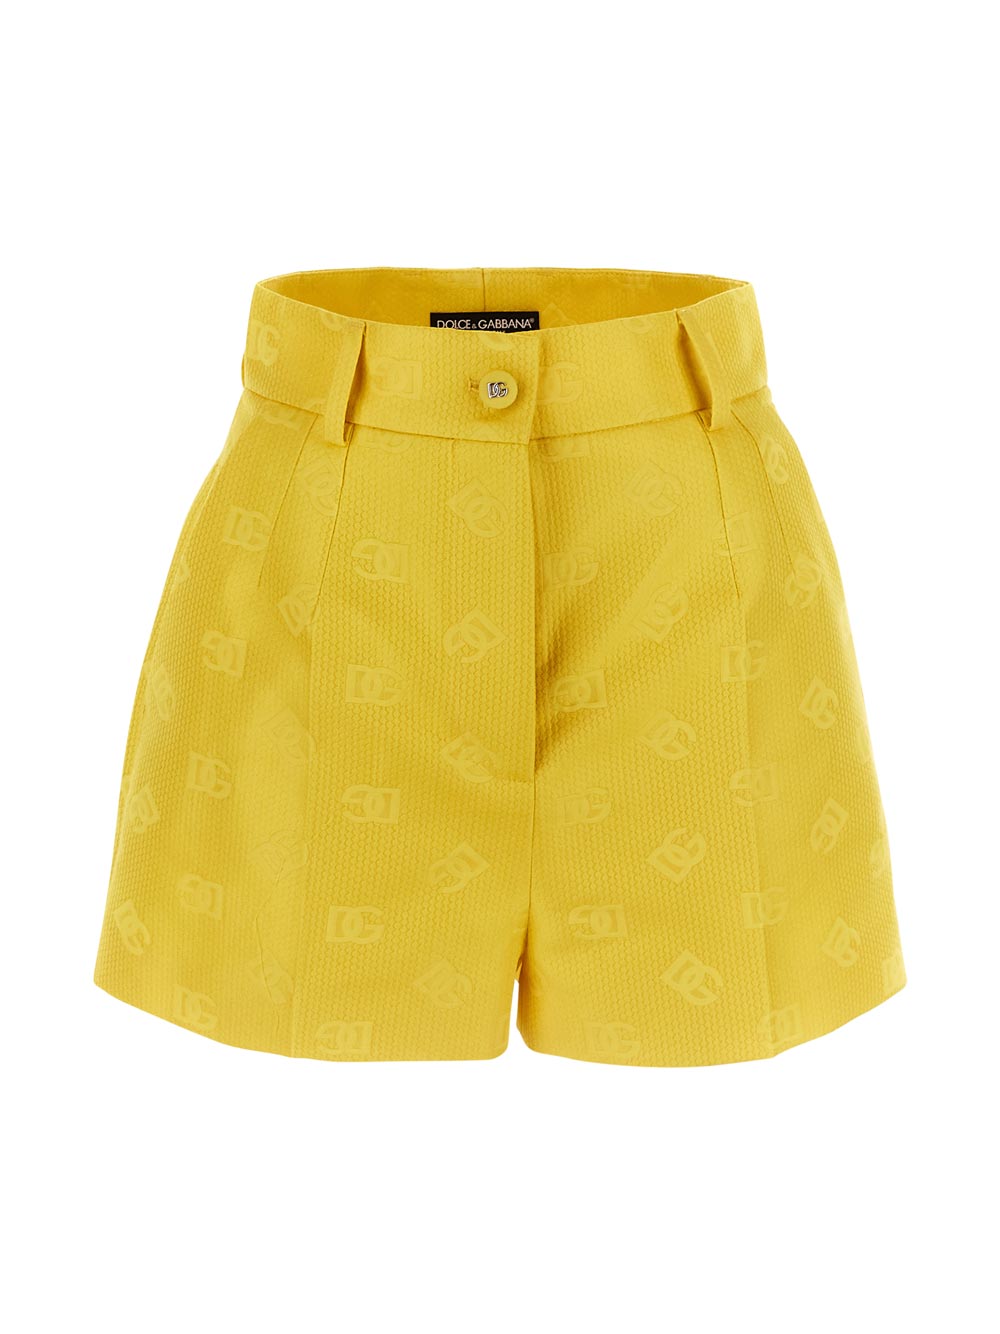 Dolce & Gabbana Jacquard Shorts With All-Over Dg Logo